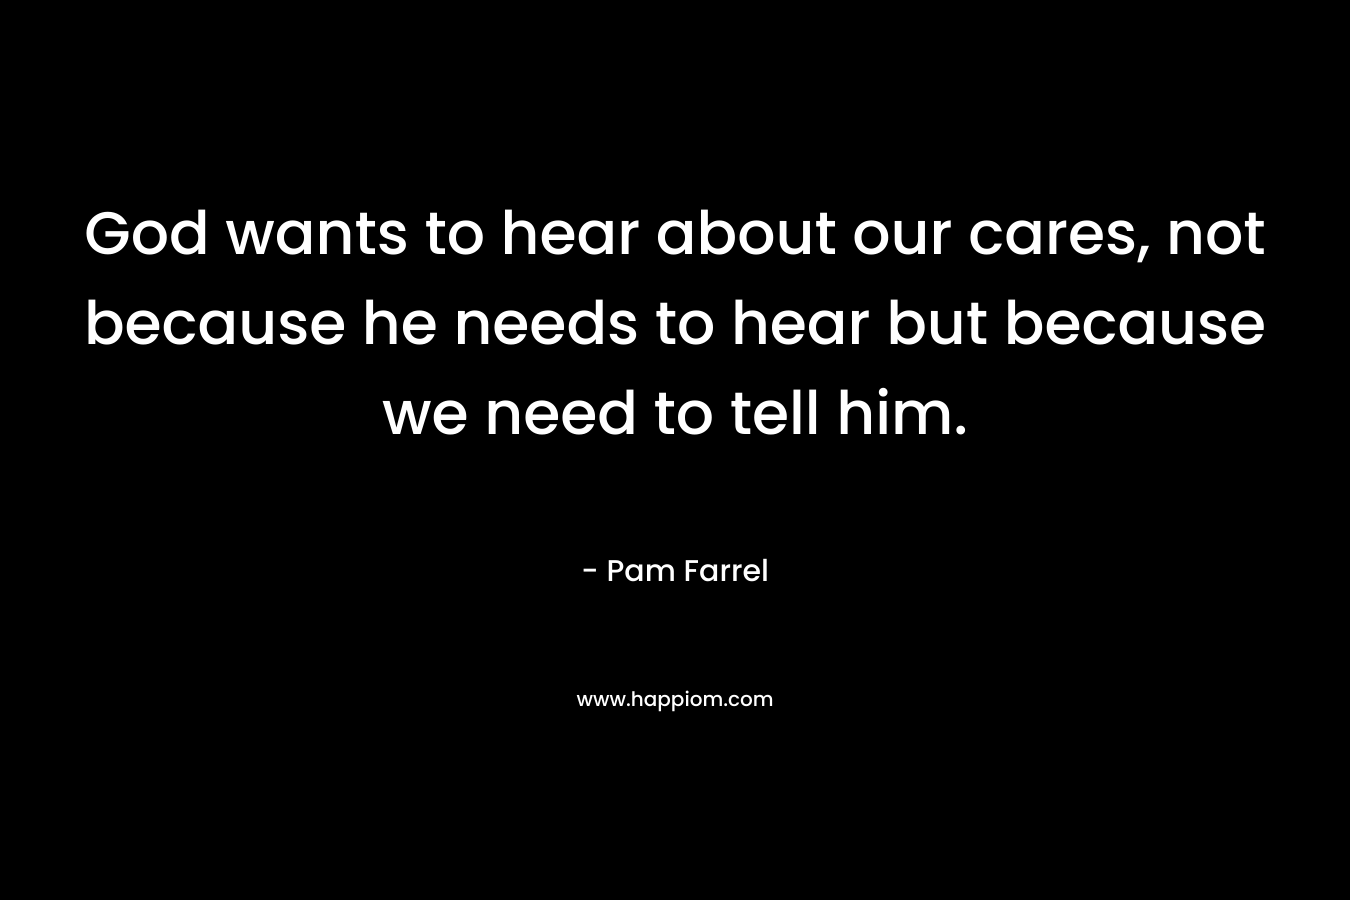 God wants to hear about our cares, not because he needs to hear but because we need to tell him.